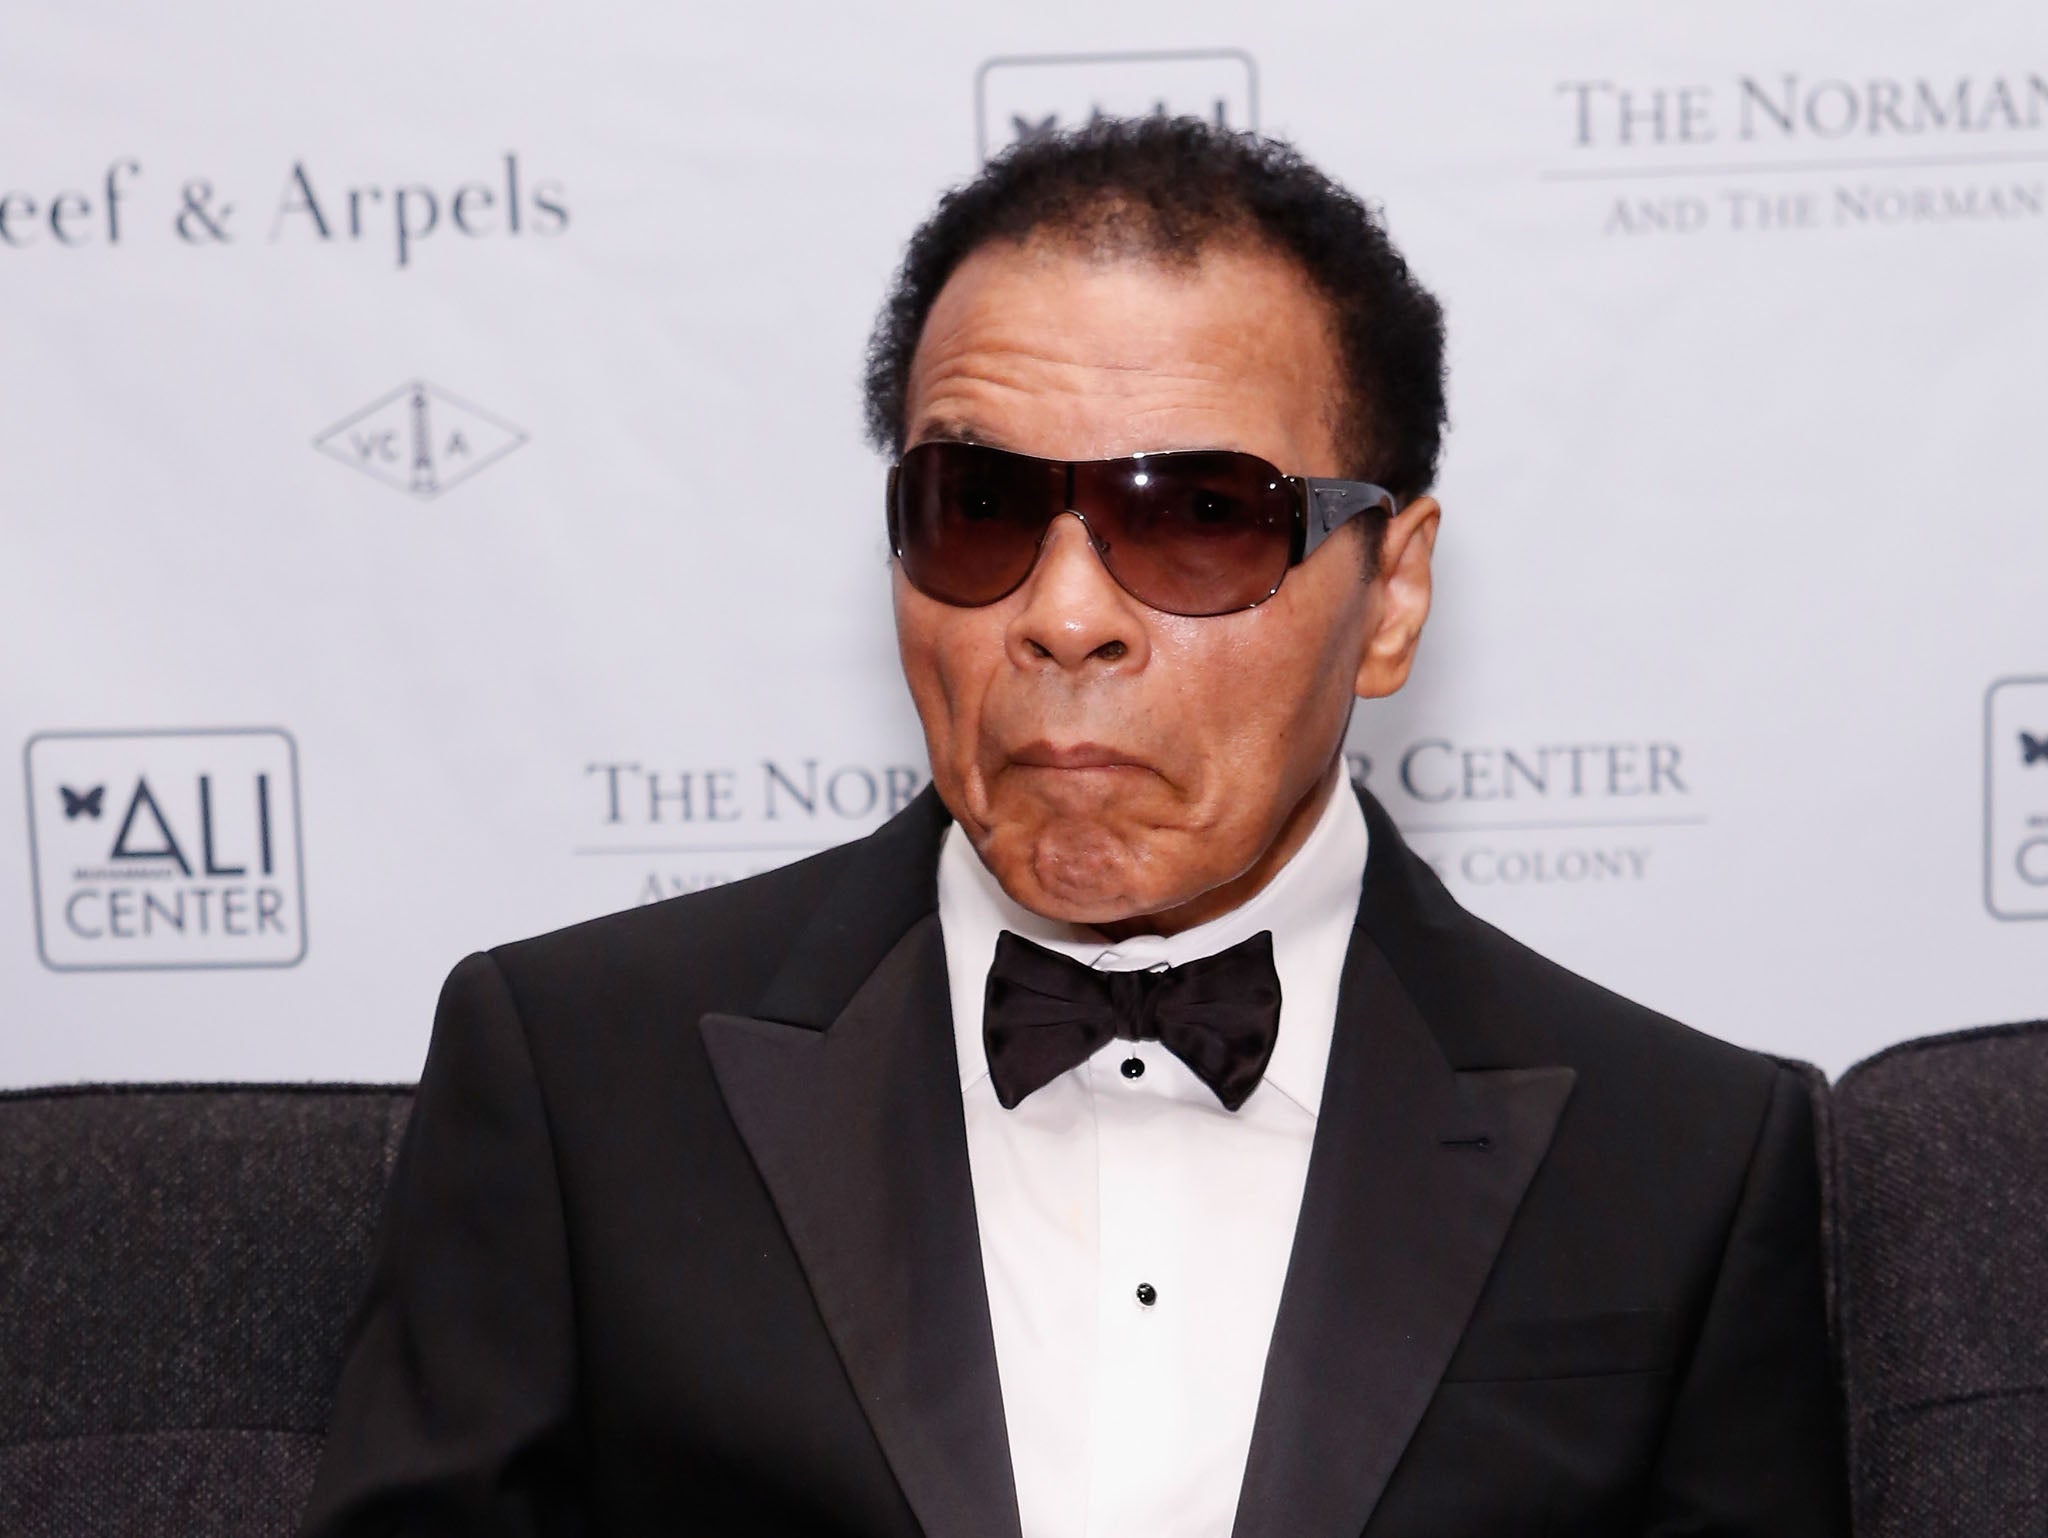 Muhammad Ali at the Norman Mailer Center 4th Annual Benefit Gala in October 2012